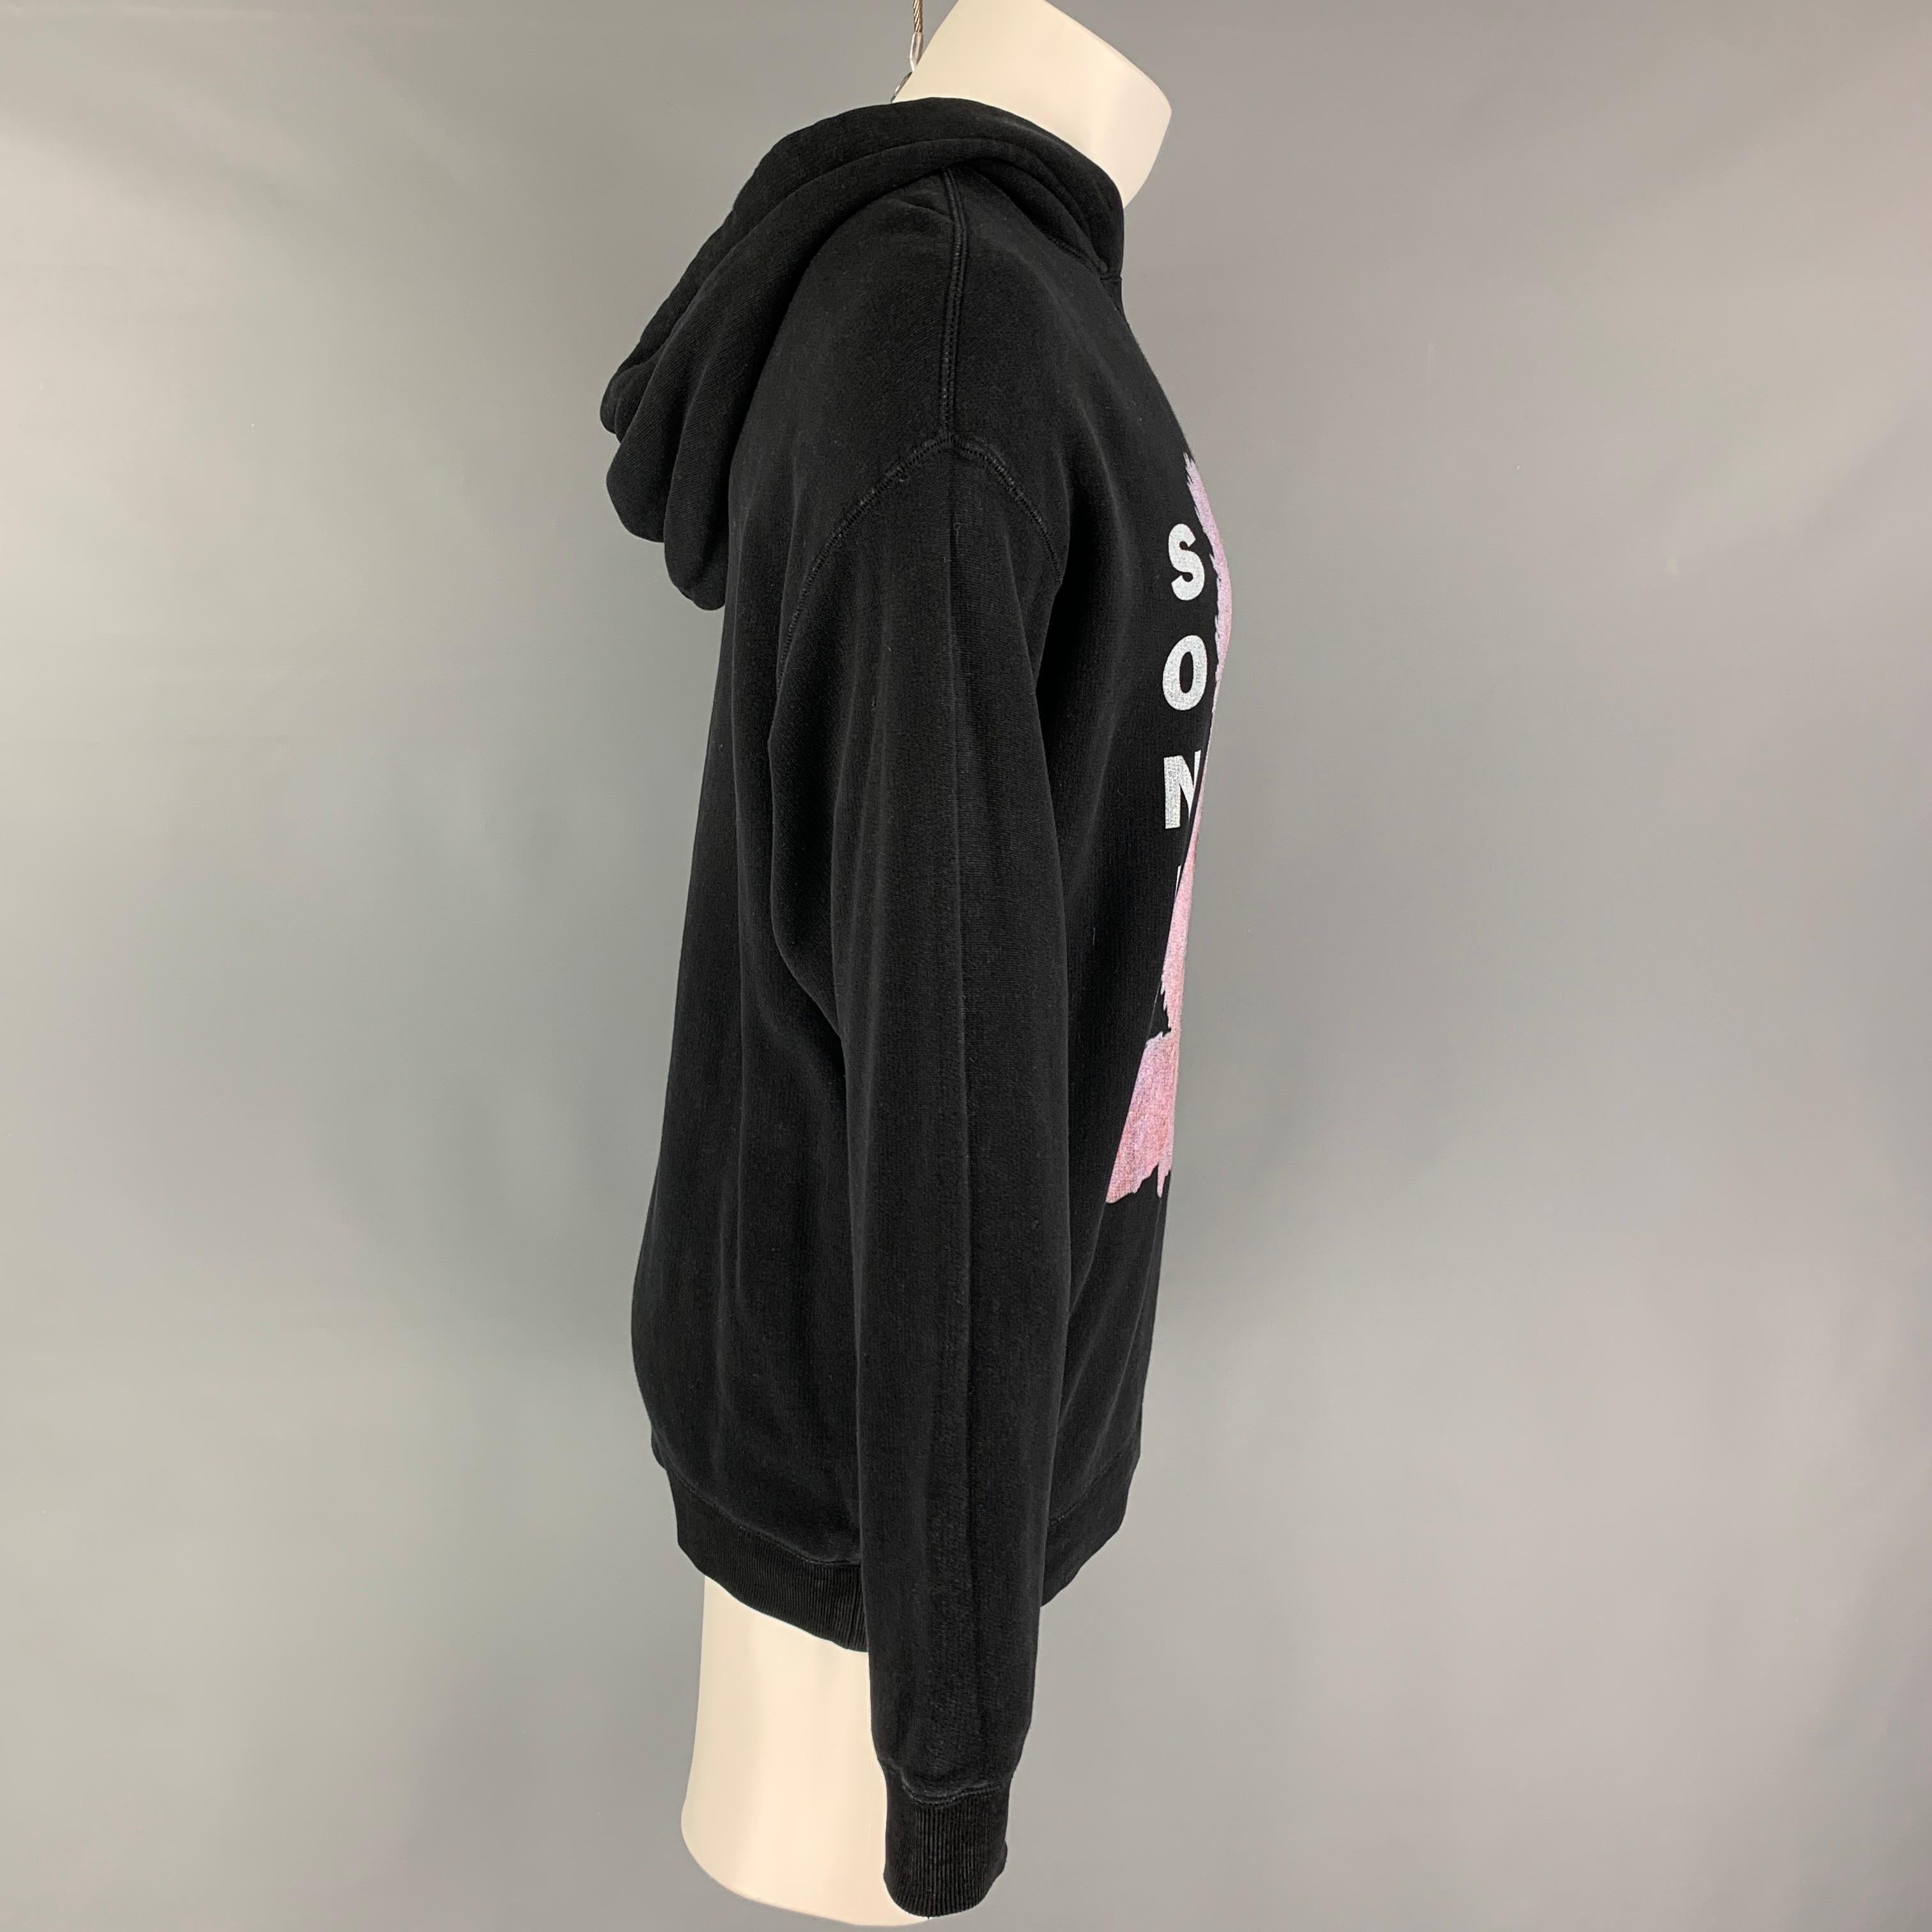 R13 sweatshirt comes in a black & pink cotton / lyocell featuring a 